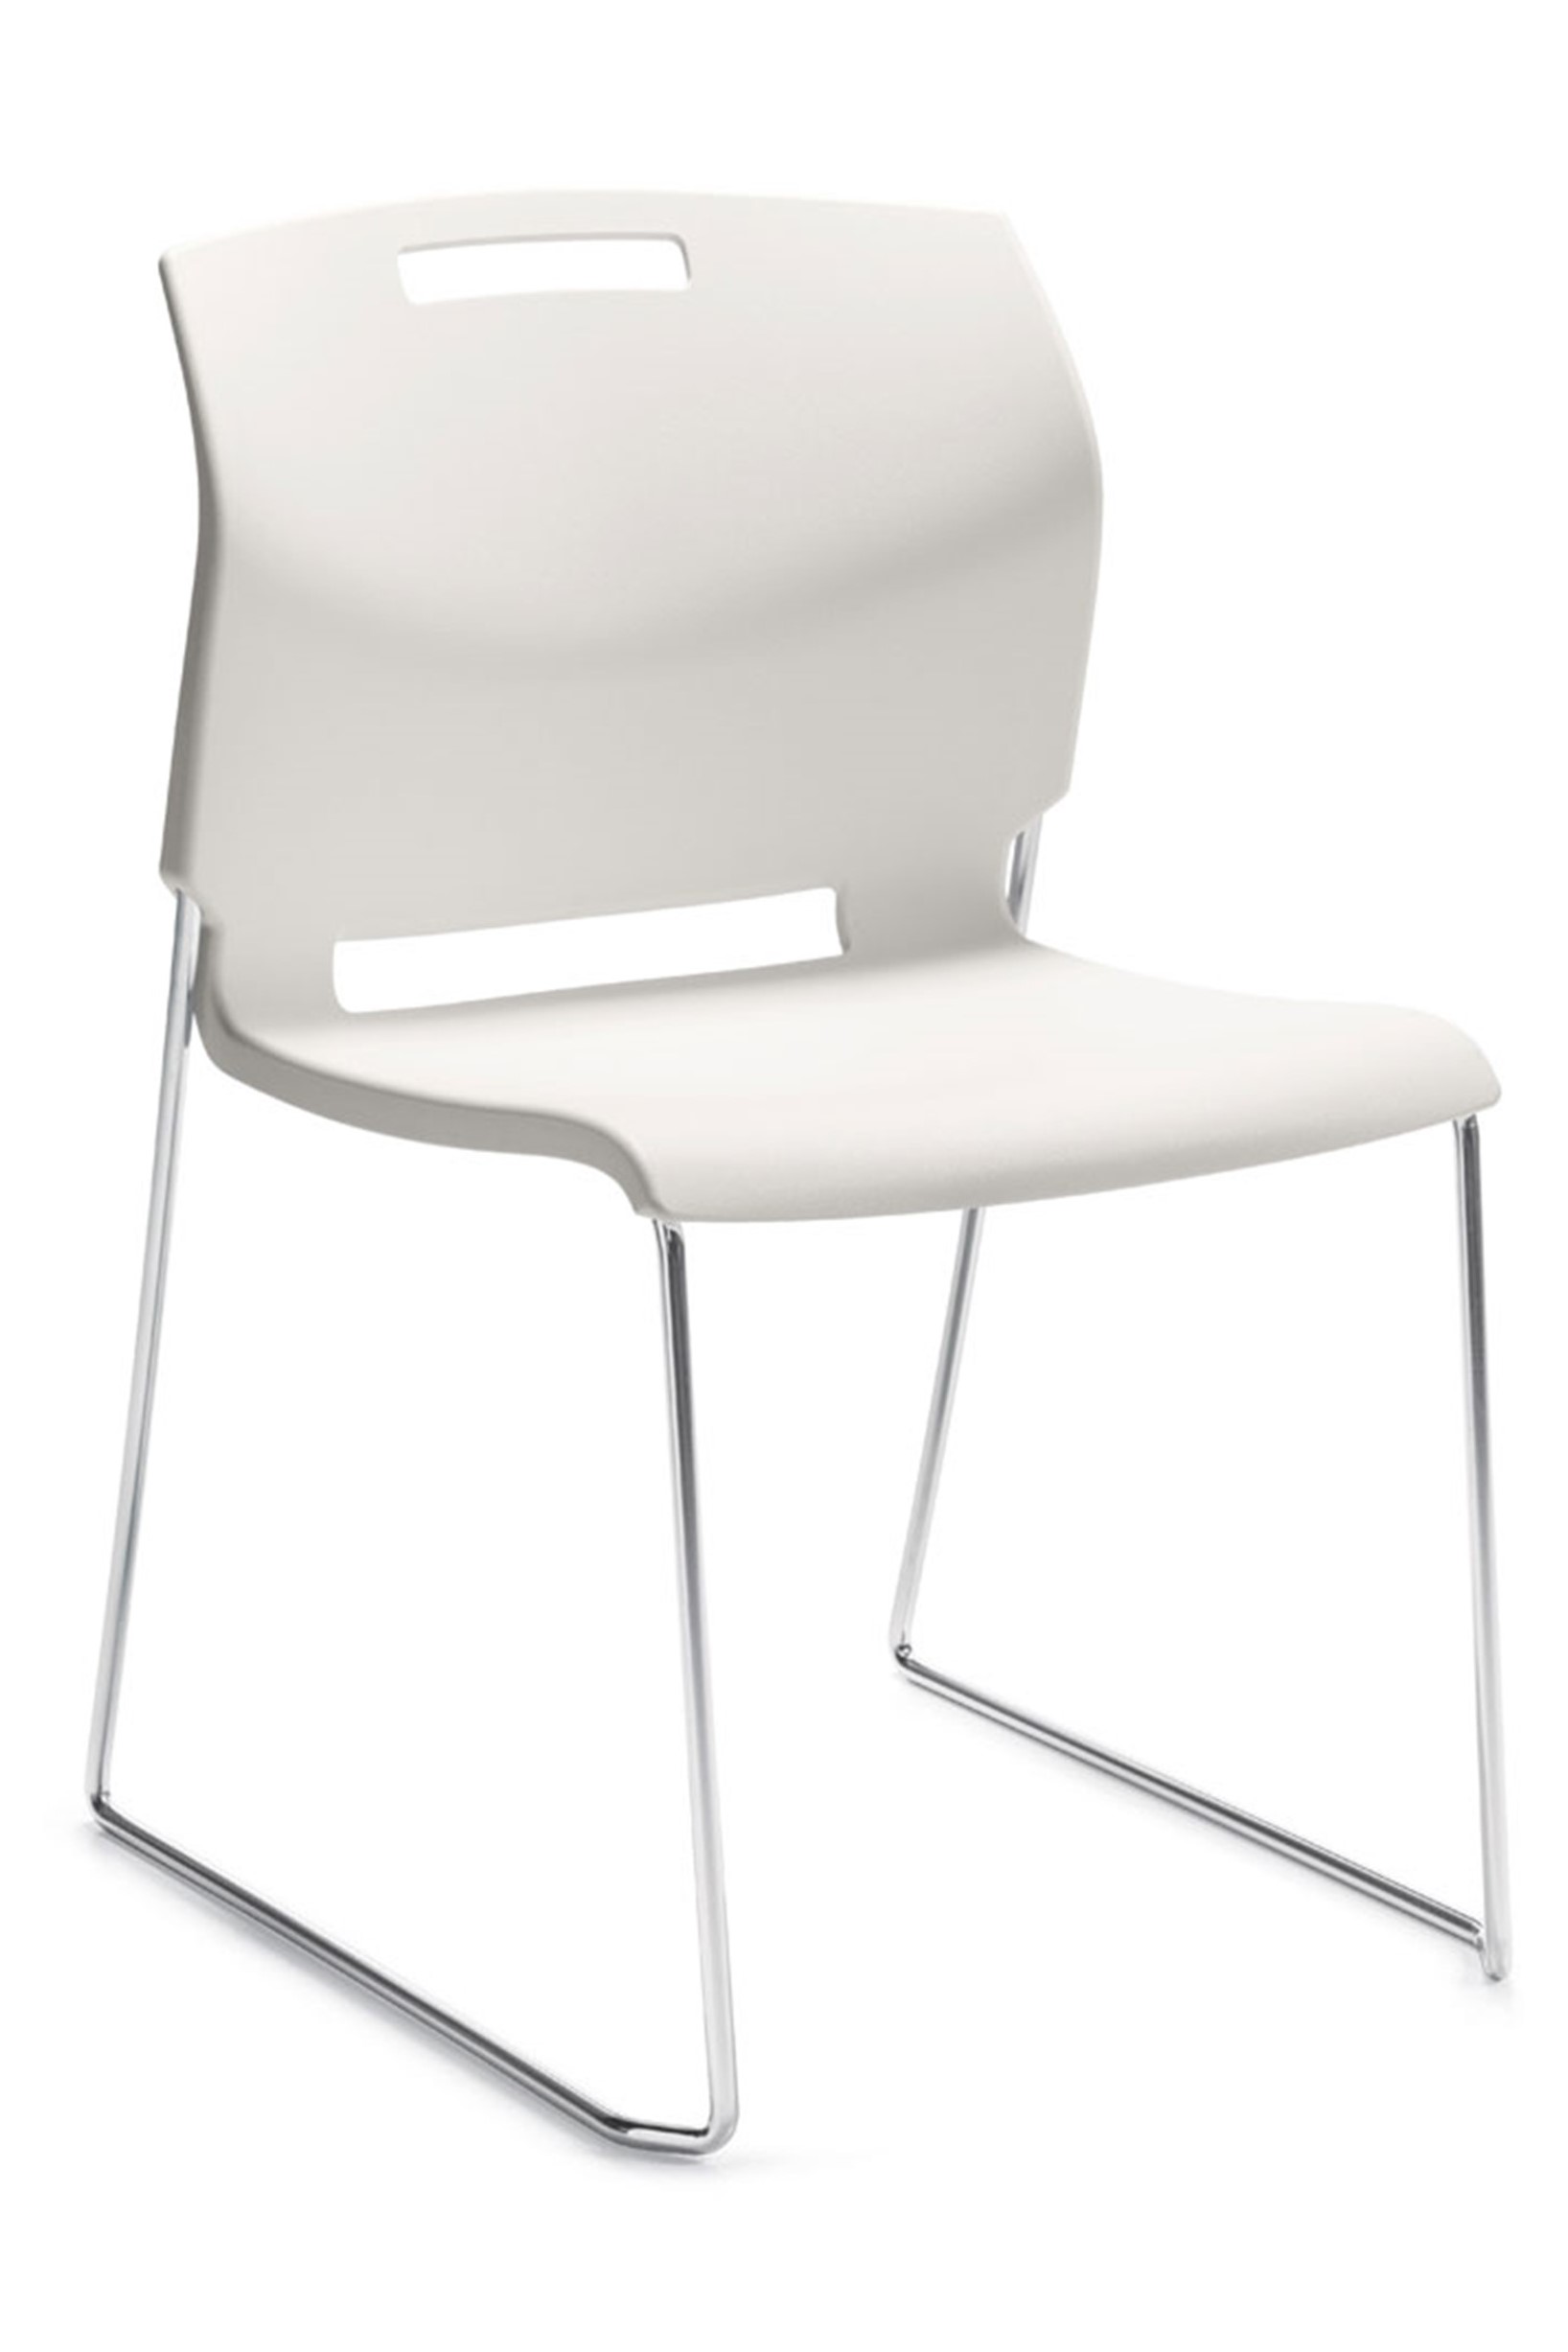 White armless high density stack chair (34 high on a dolly) with solid chrome sled base and built-in convenient carrying handle in the seat back.